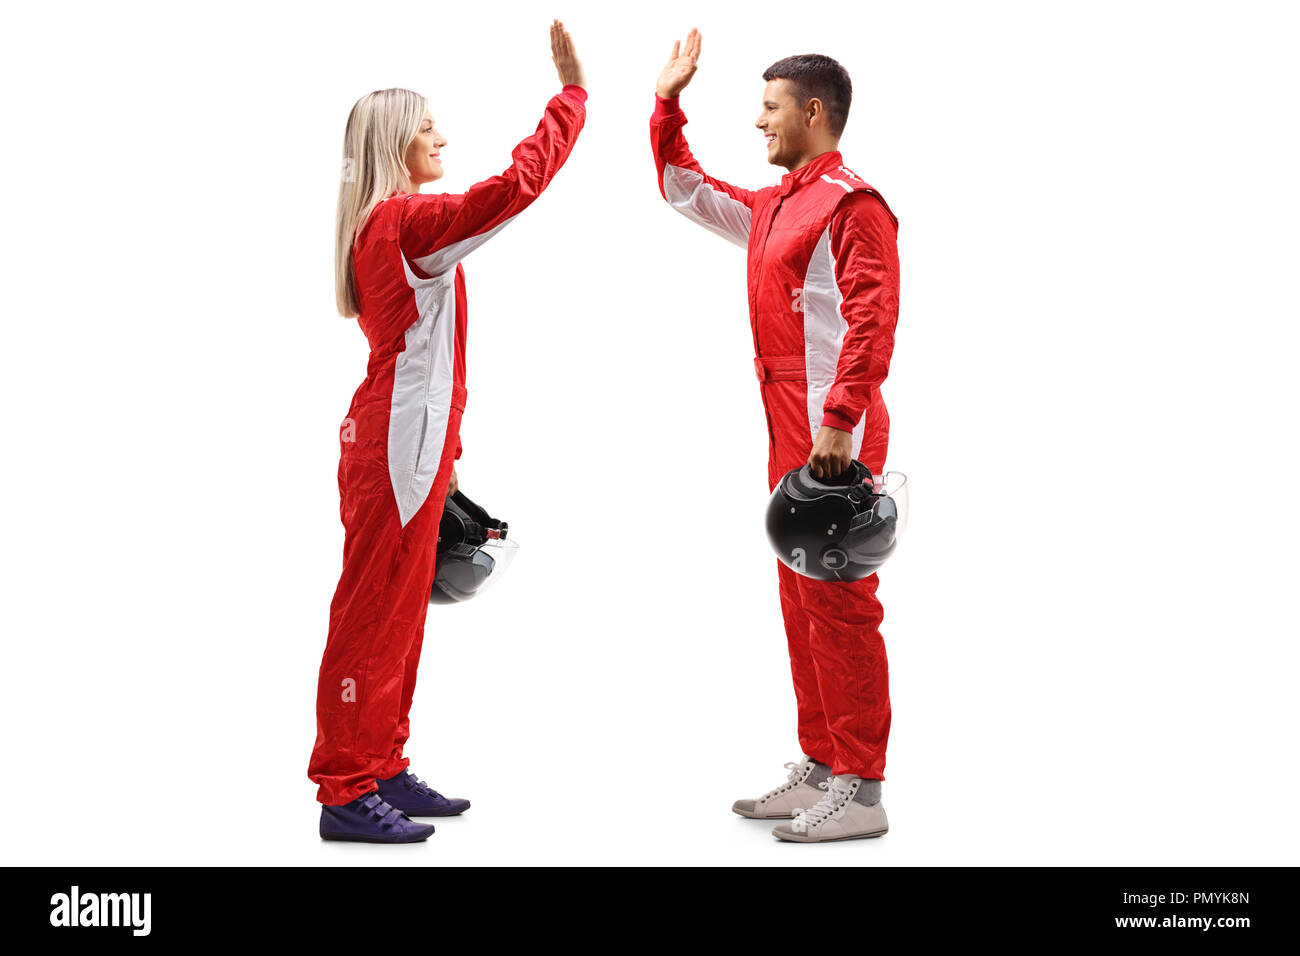 Full length profile shot of a female and a male racer high-fiving each other isolated on white background Stock Photo